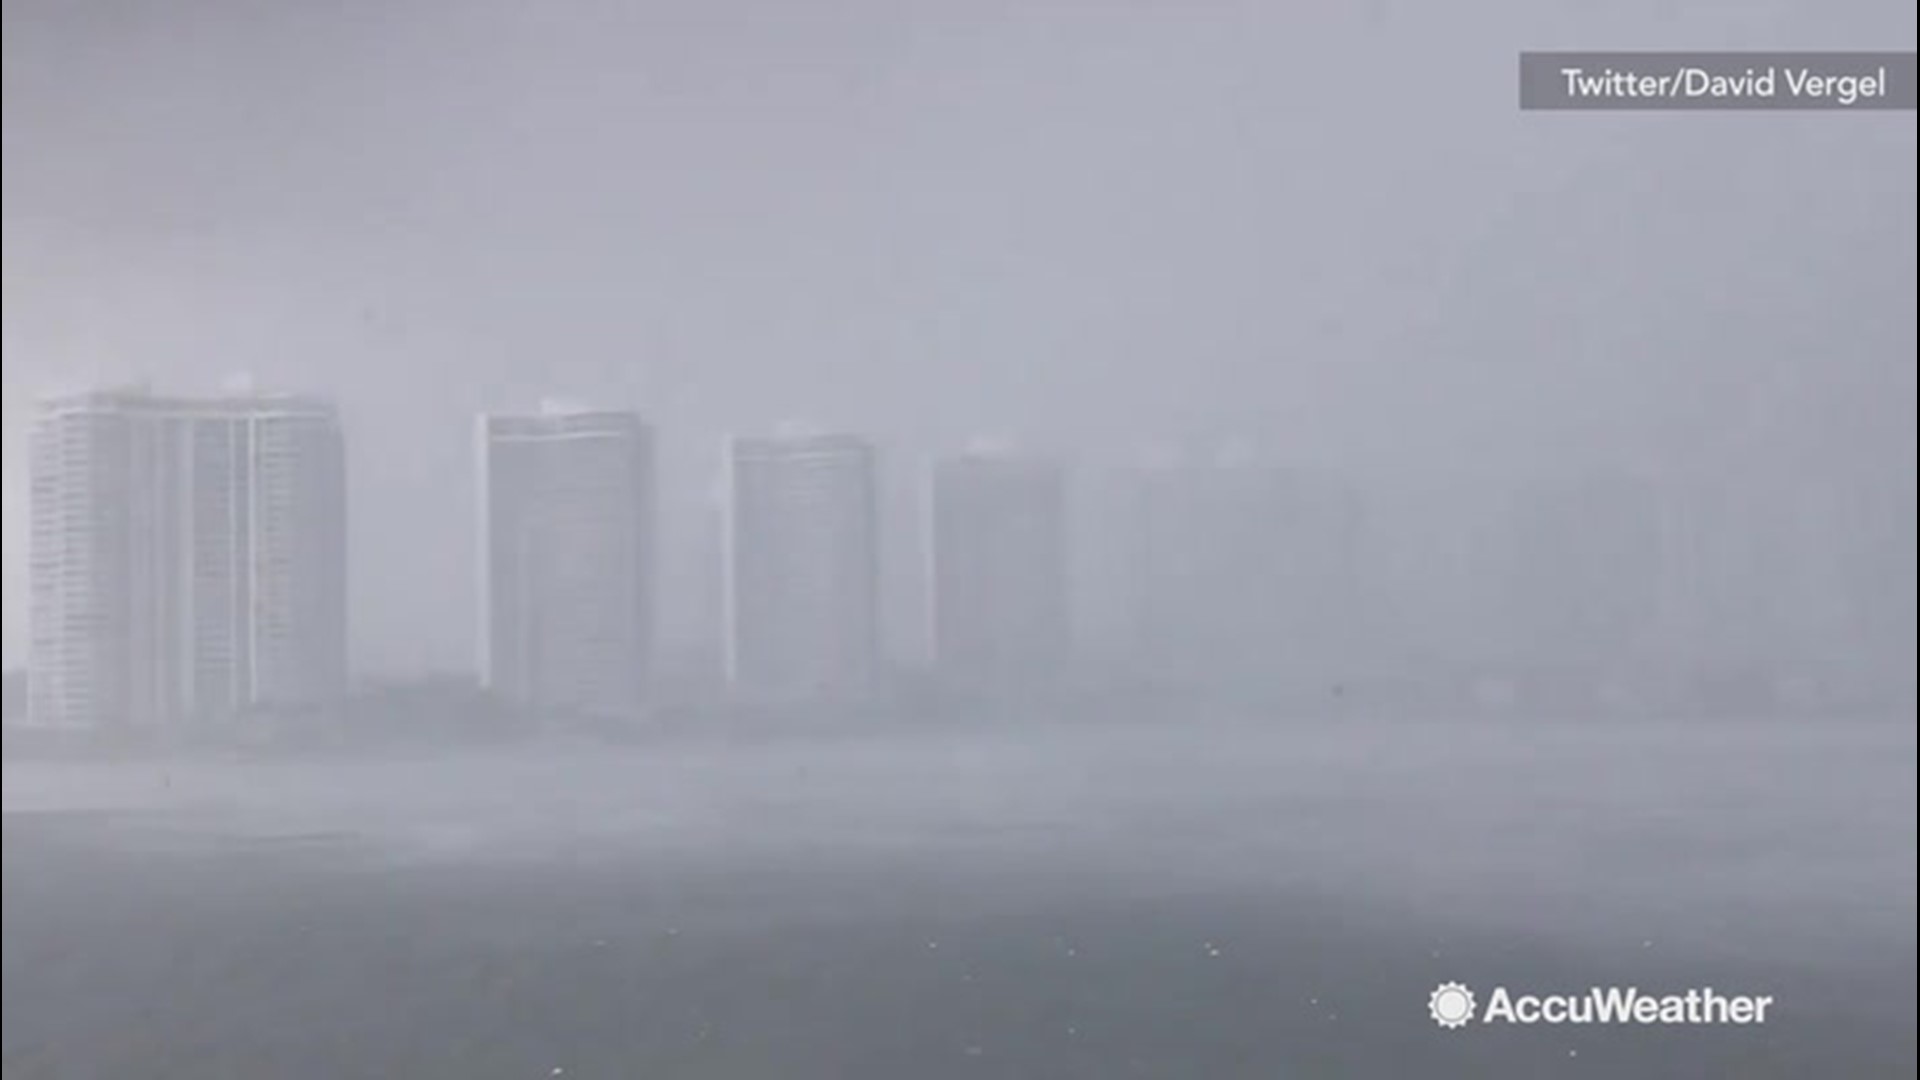 Aventura, Florida was covered by a storm that rolled into the city on June 24. The powerful storm took less than a minute to completely cover the city, striking it fiercely with lightning